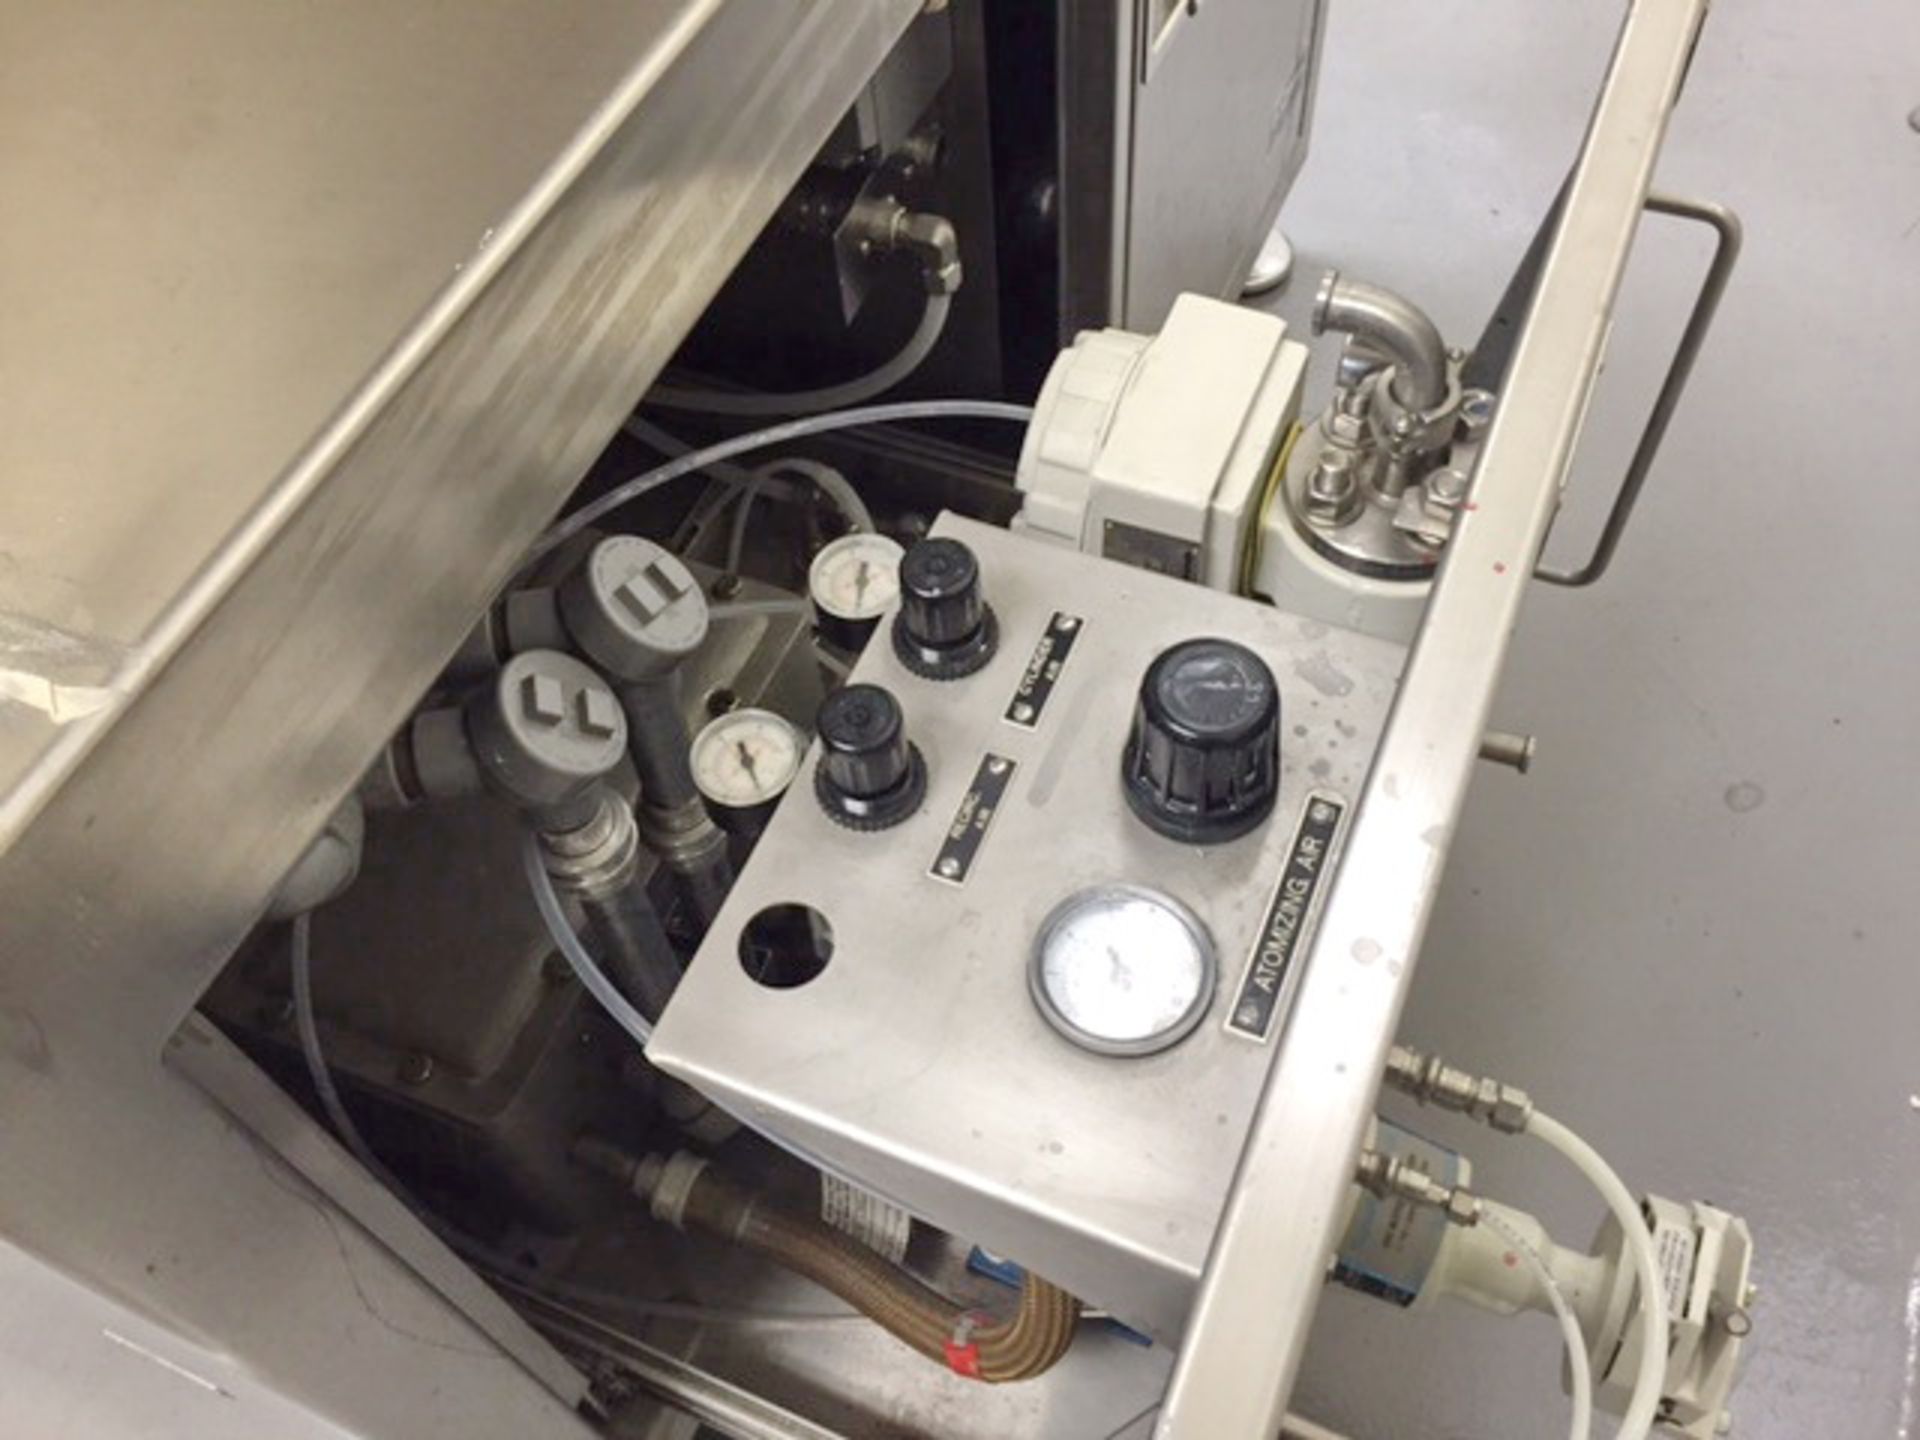 Thomas XR Perforate Interchangeable Pan Coating System rated for solvents, Model Compulab 24 - Image 8 of 24